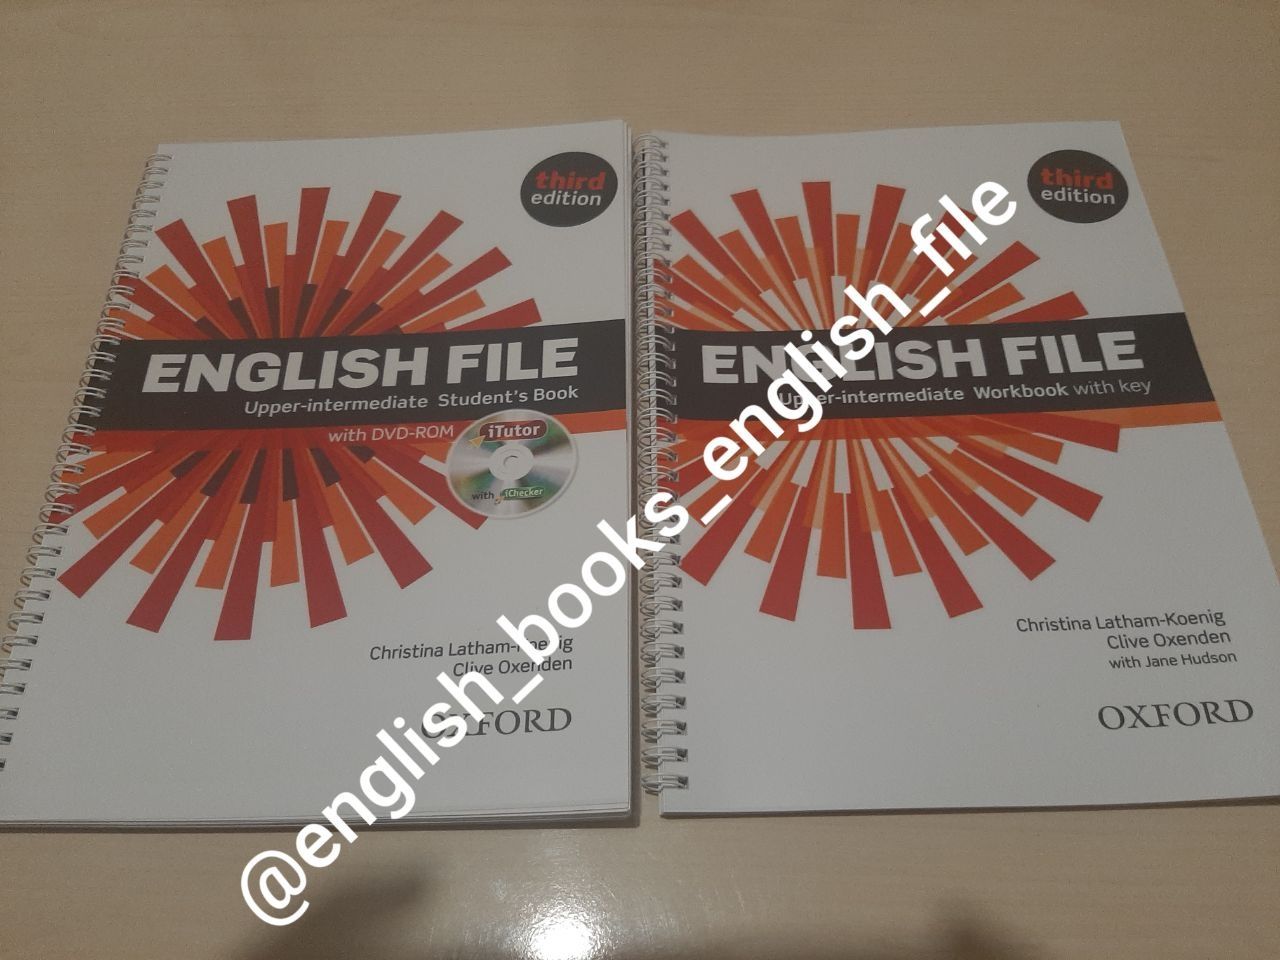 English file, Family and friends, Solutions, английские книги, Fly hig